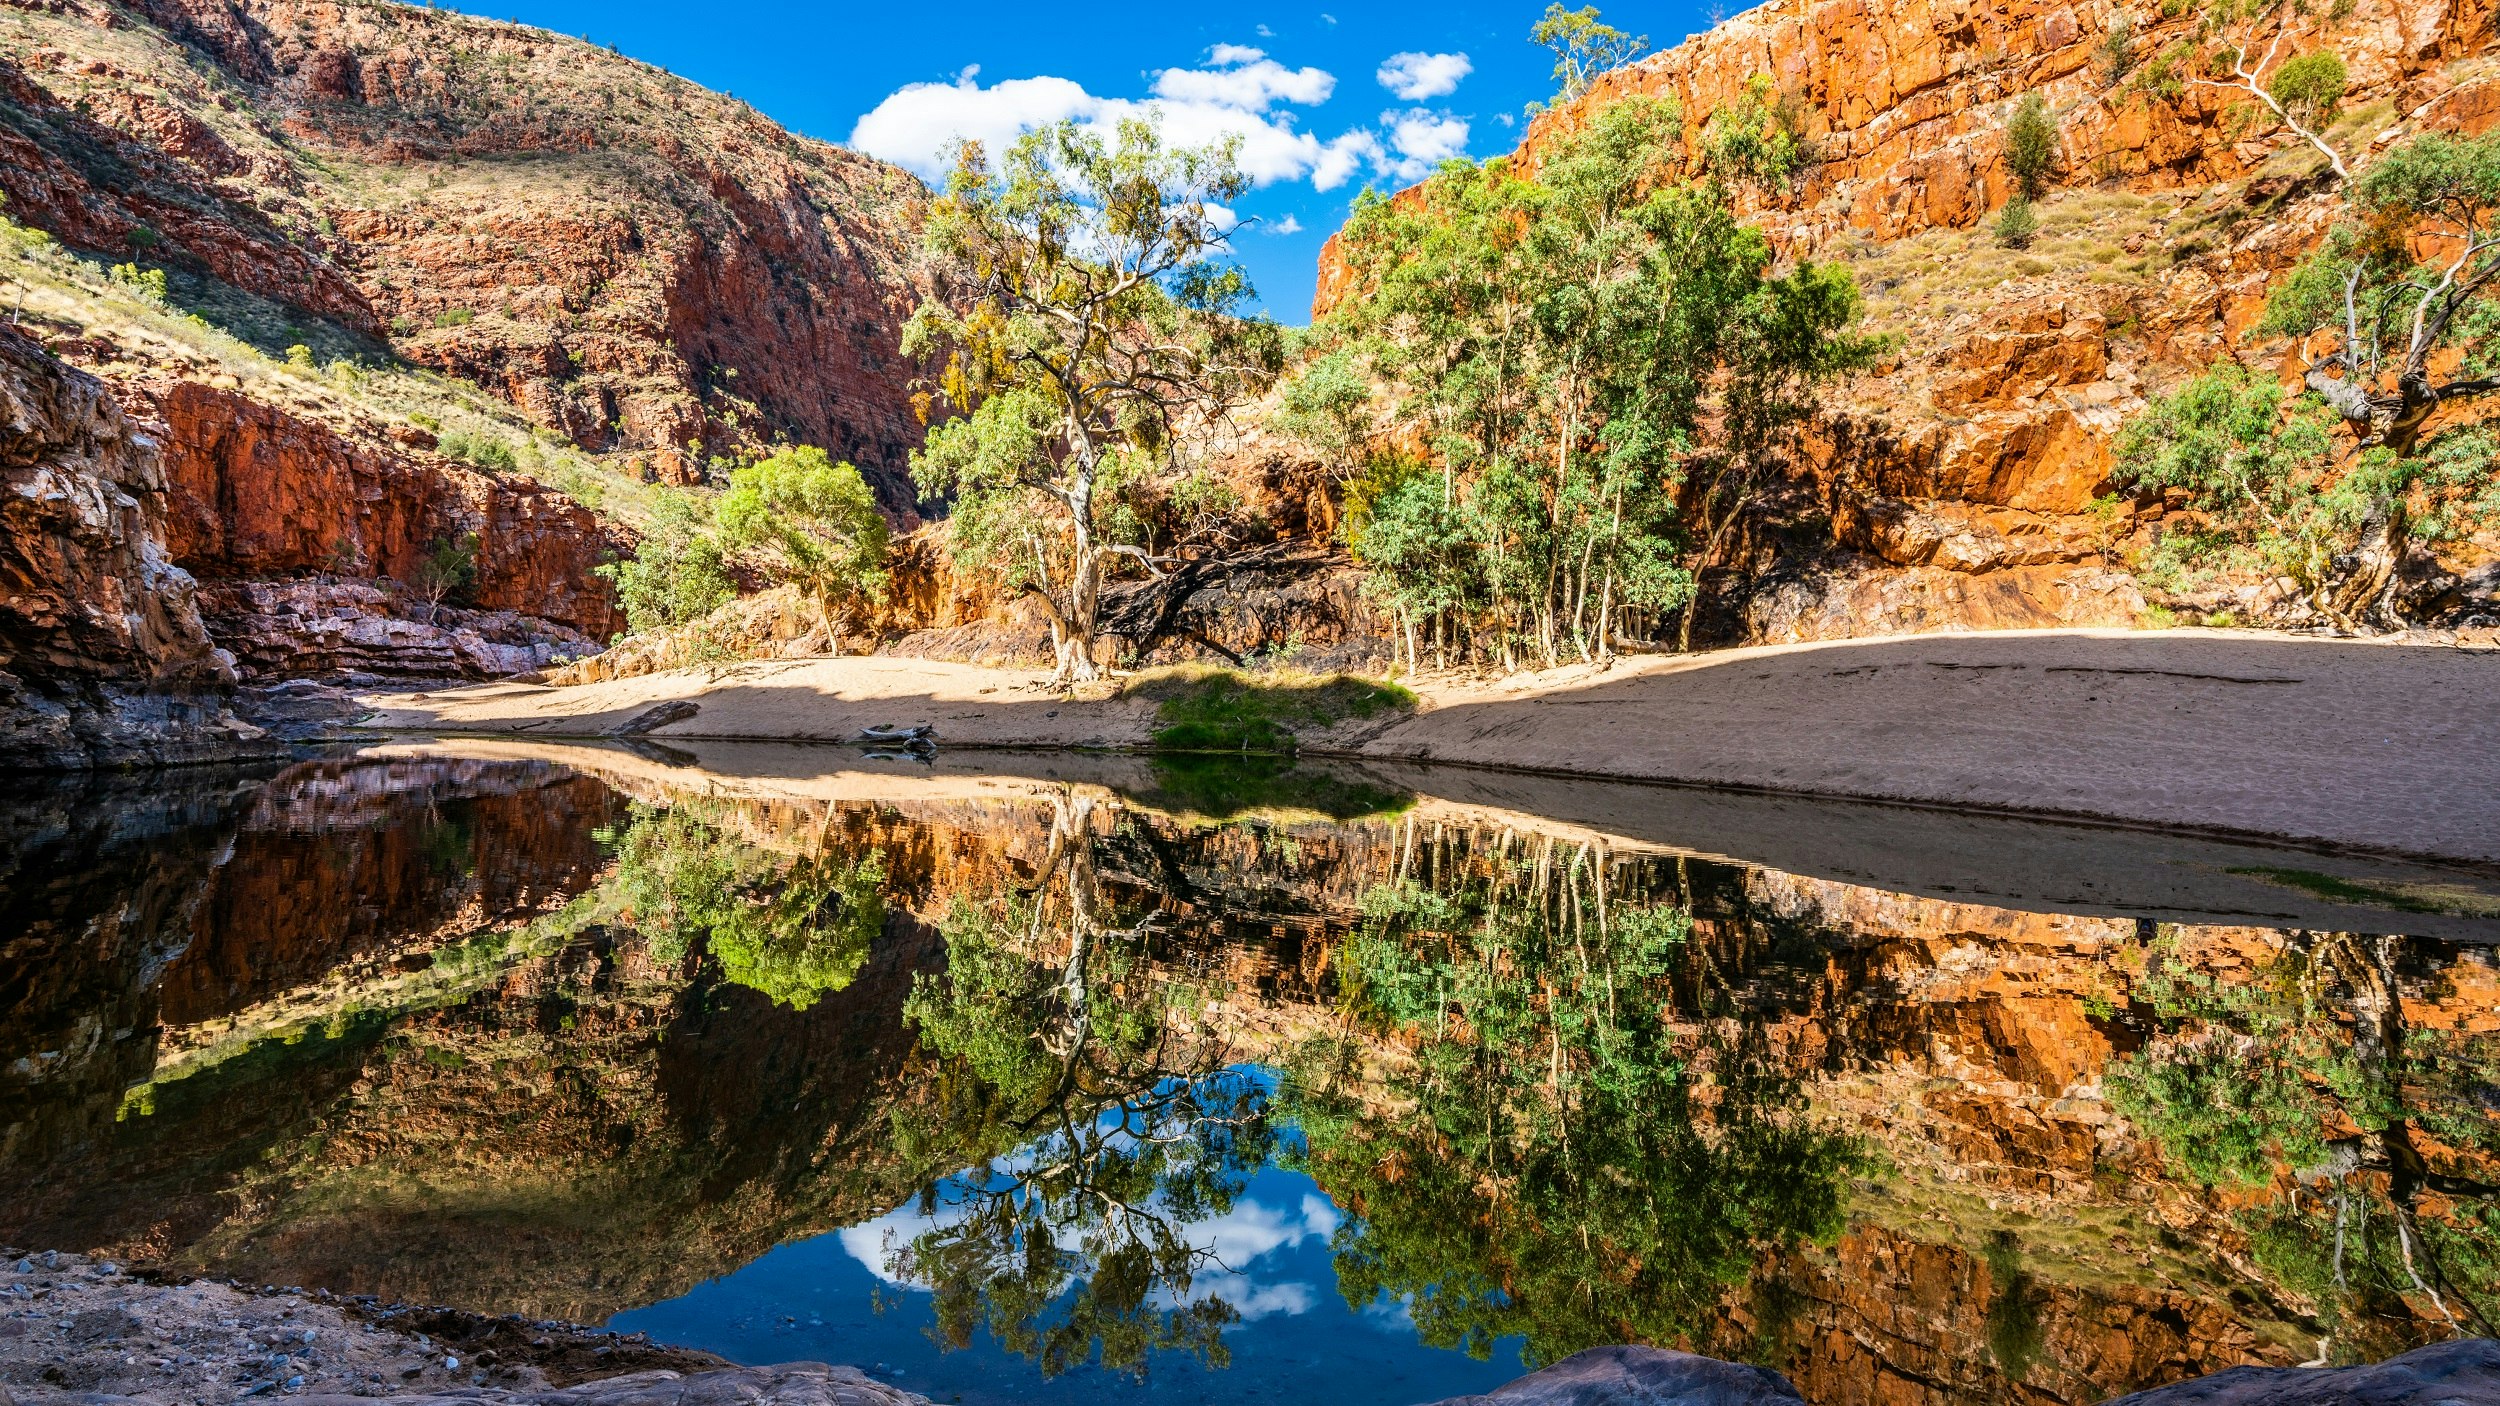 Ormiston gorge water hole in the West MacDonnell Ranges, Northern Territory; rec cliffs fringed with green grasses loom over a few trees and a waterhole, which reflects the scene and the blue sky above